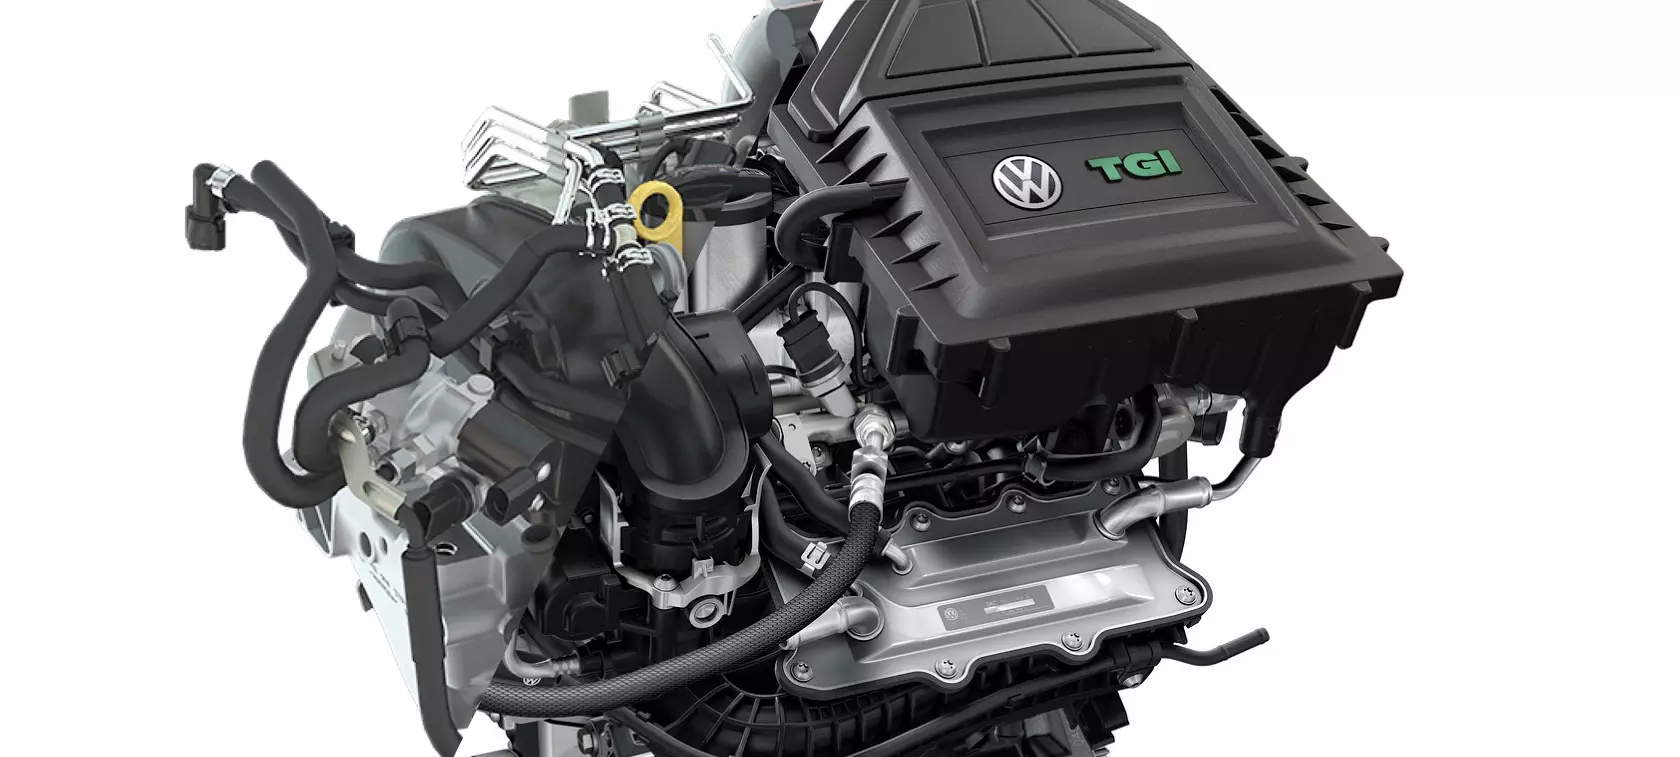 Volkswagen replaces diesels with CNG units